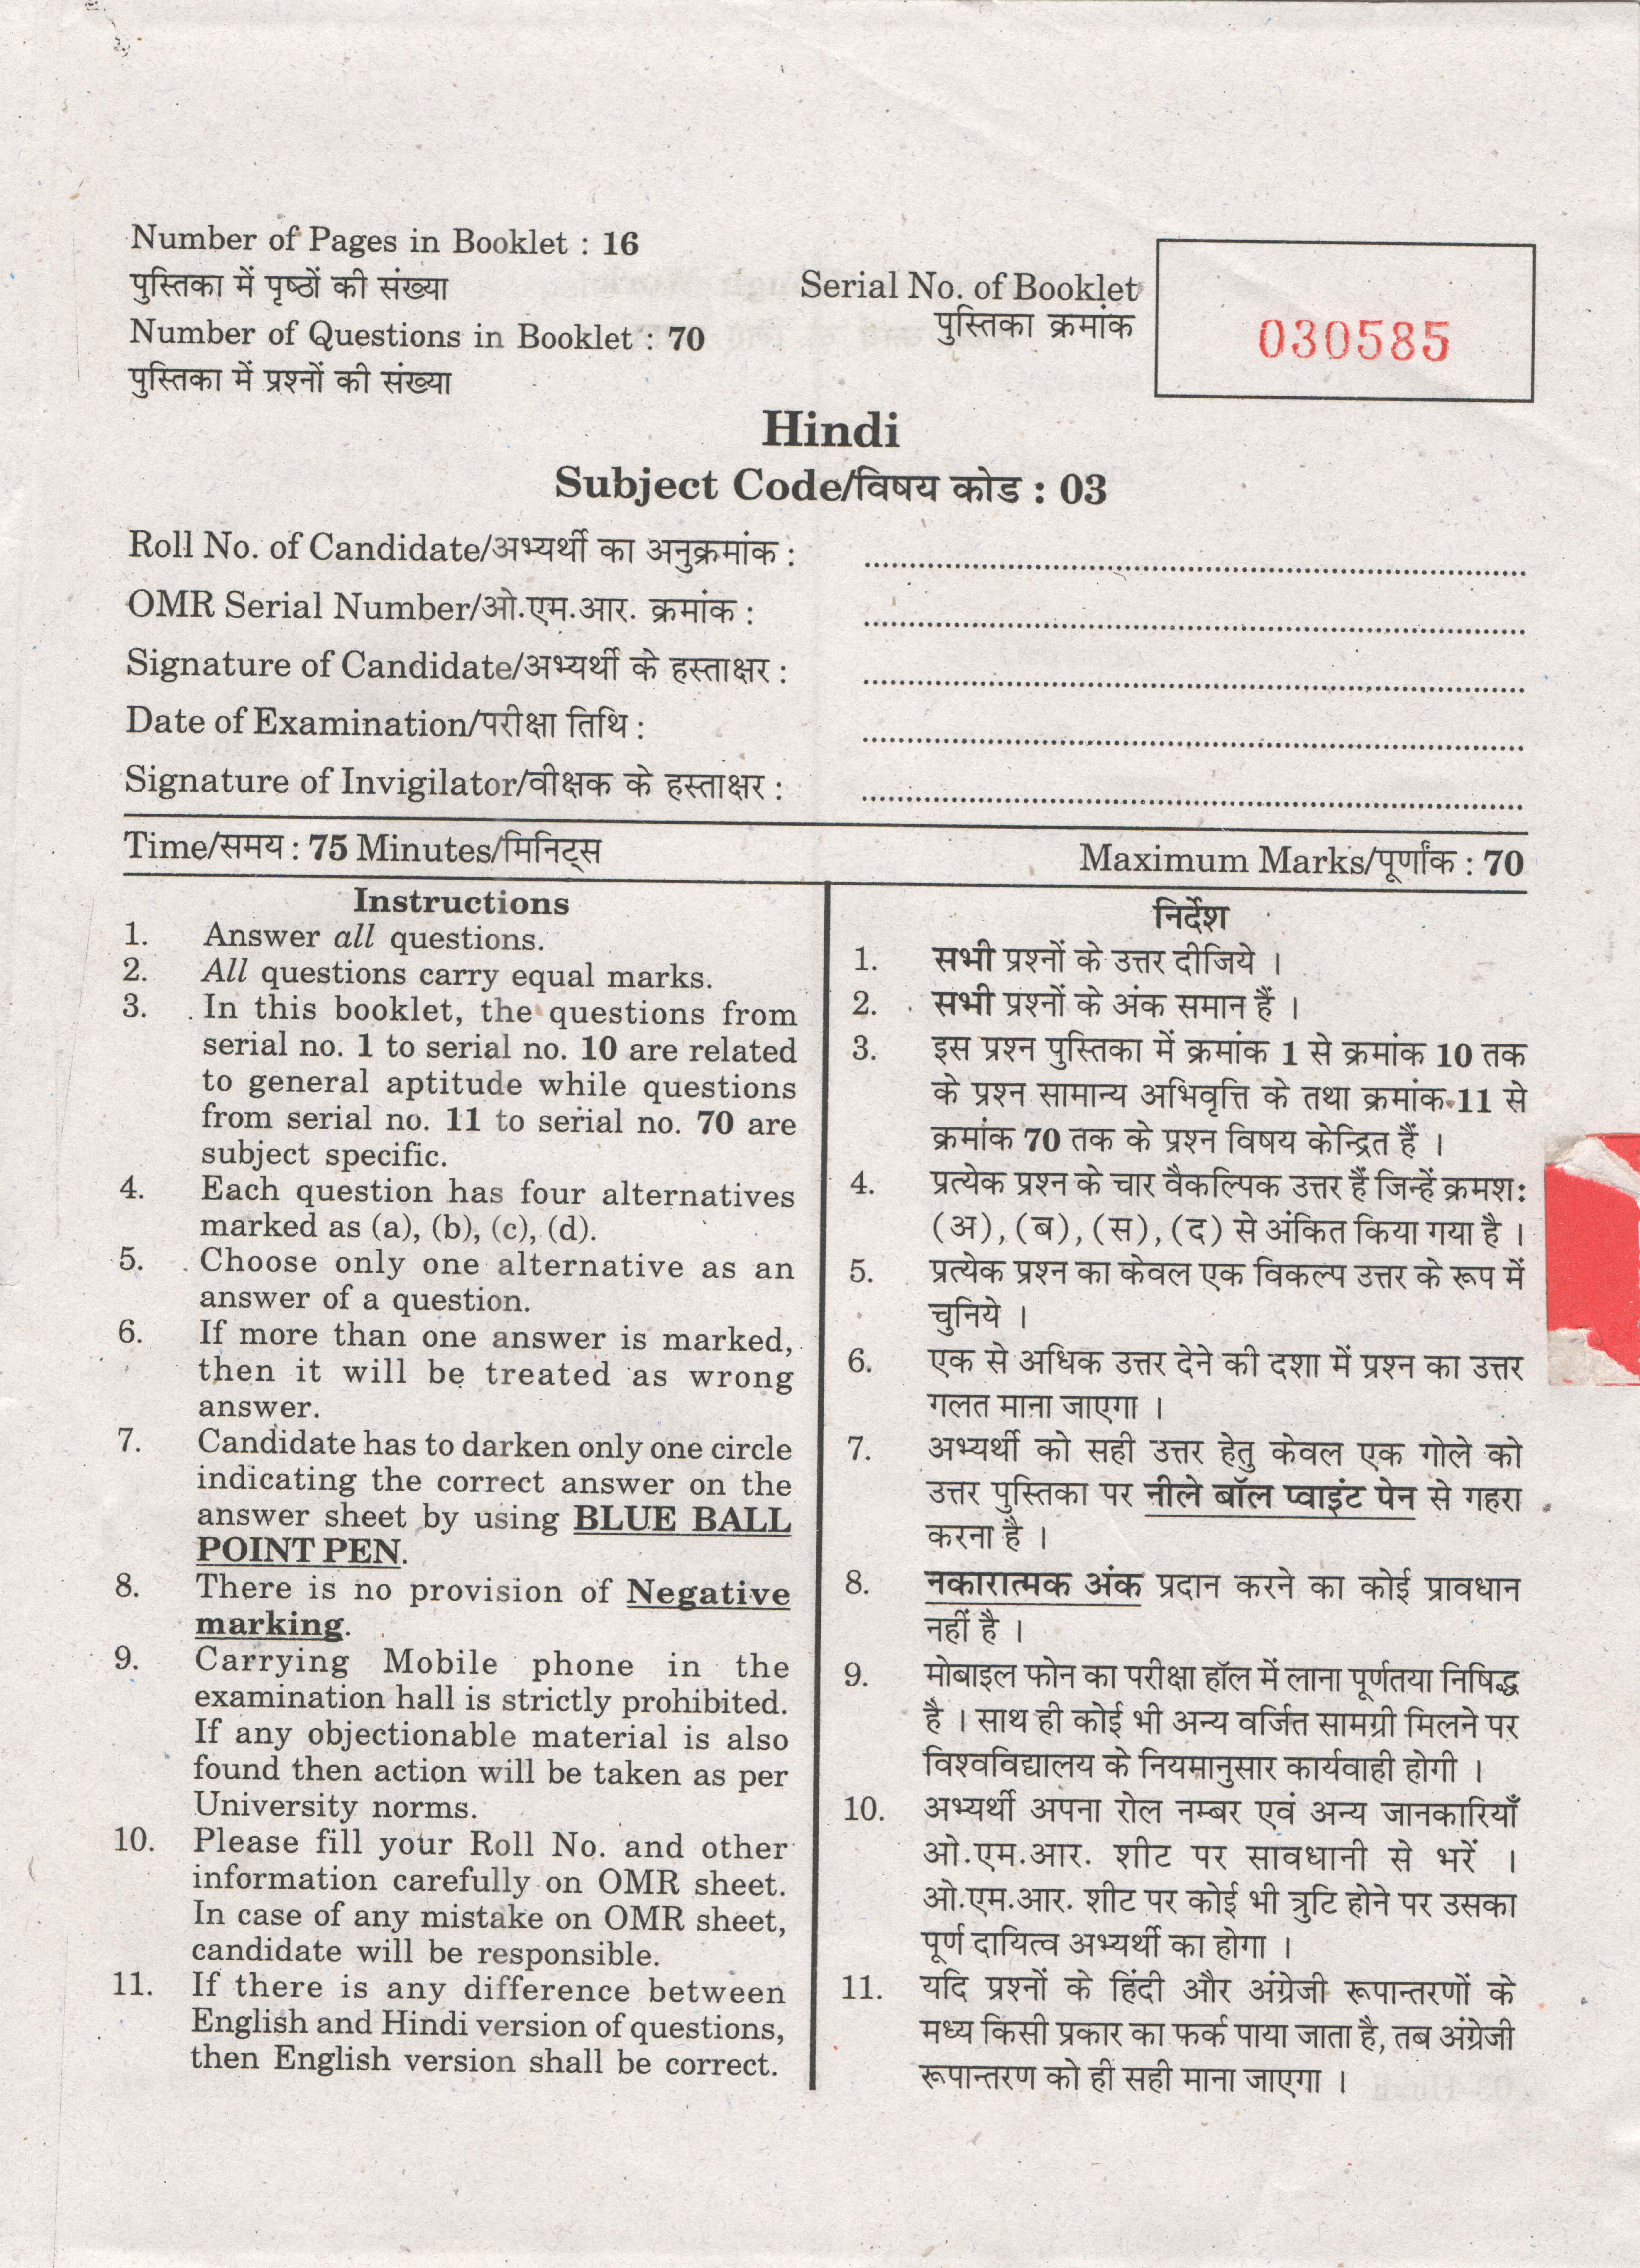 URATPG Hindi 2013 Question Paper - Page 1